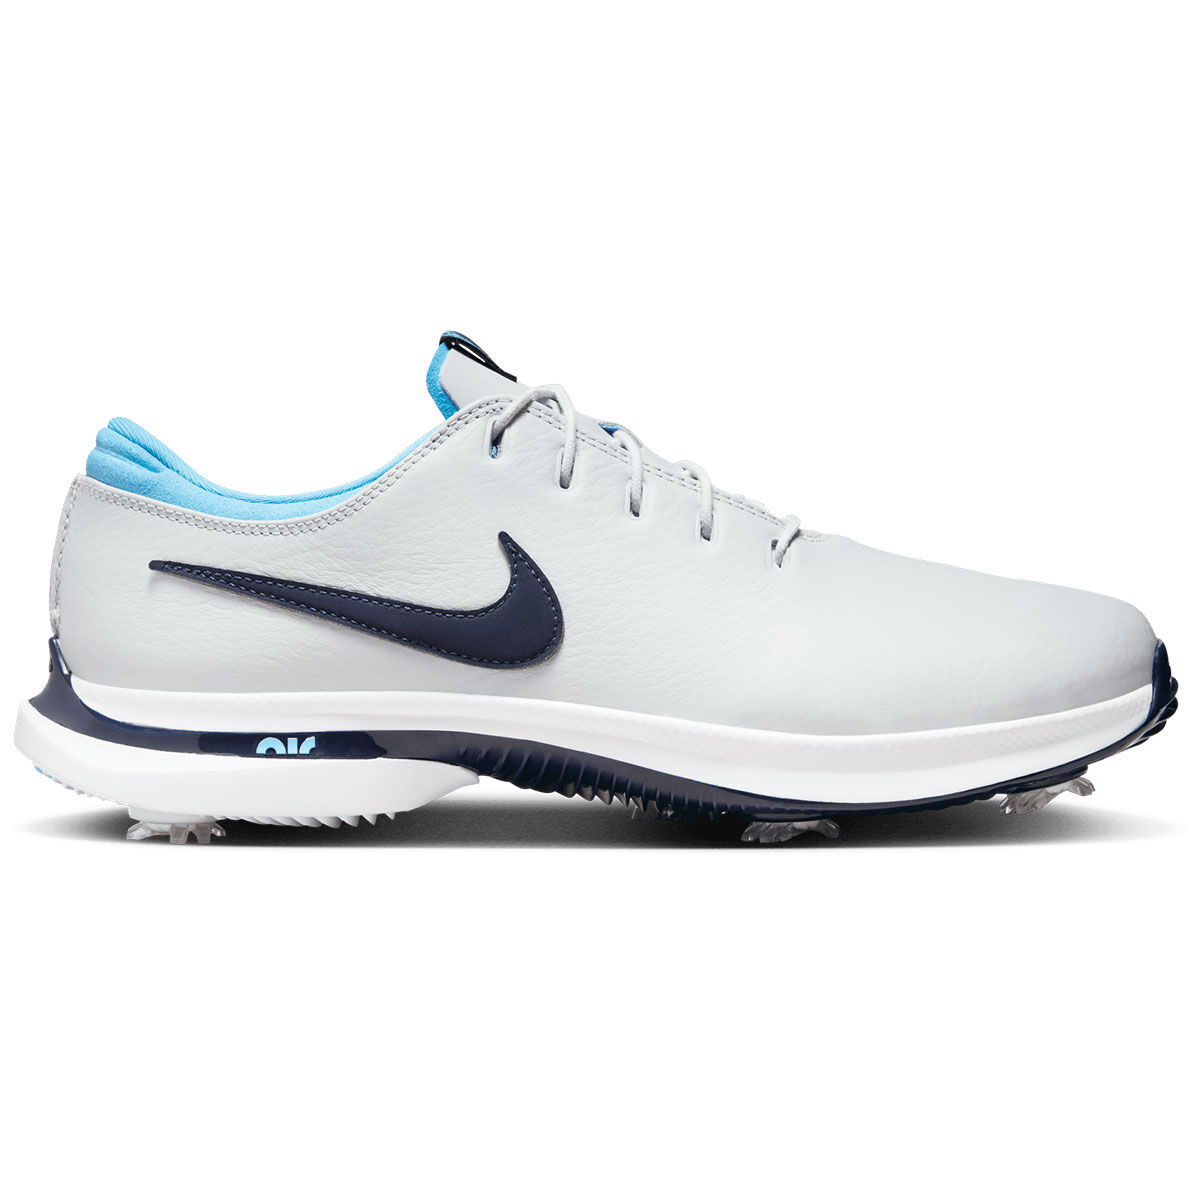 Nike Air Zoom Victory Tour 3 Waterproof Spiked Golf Shoes, Mens, Pure platinum/obsidian/white, 8 | American Golf